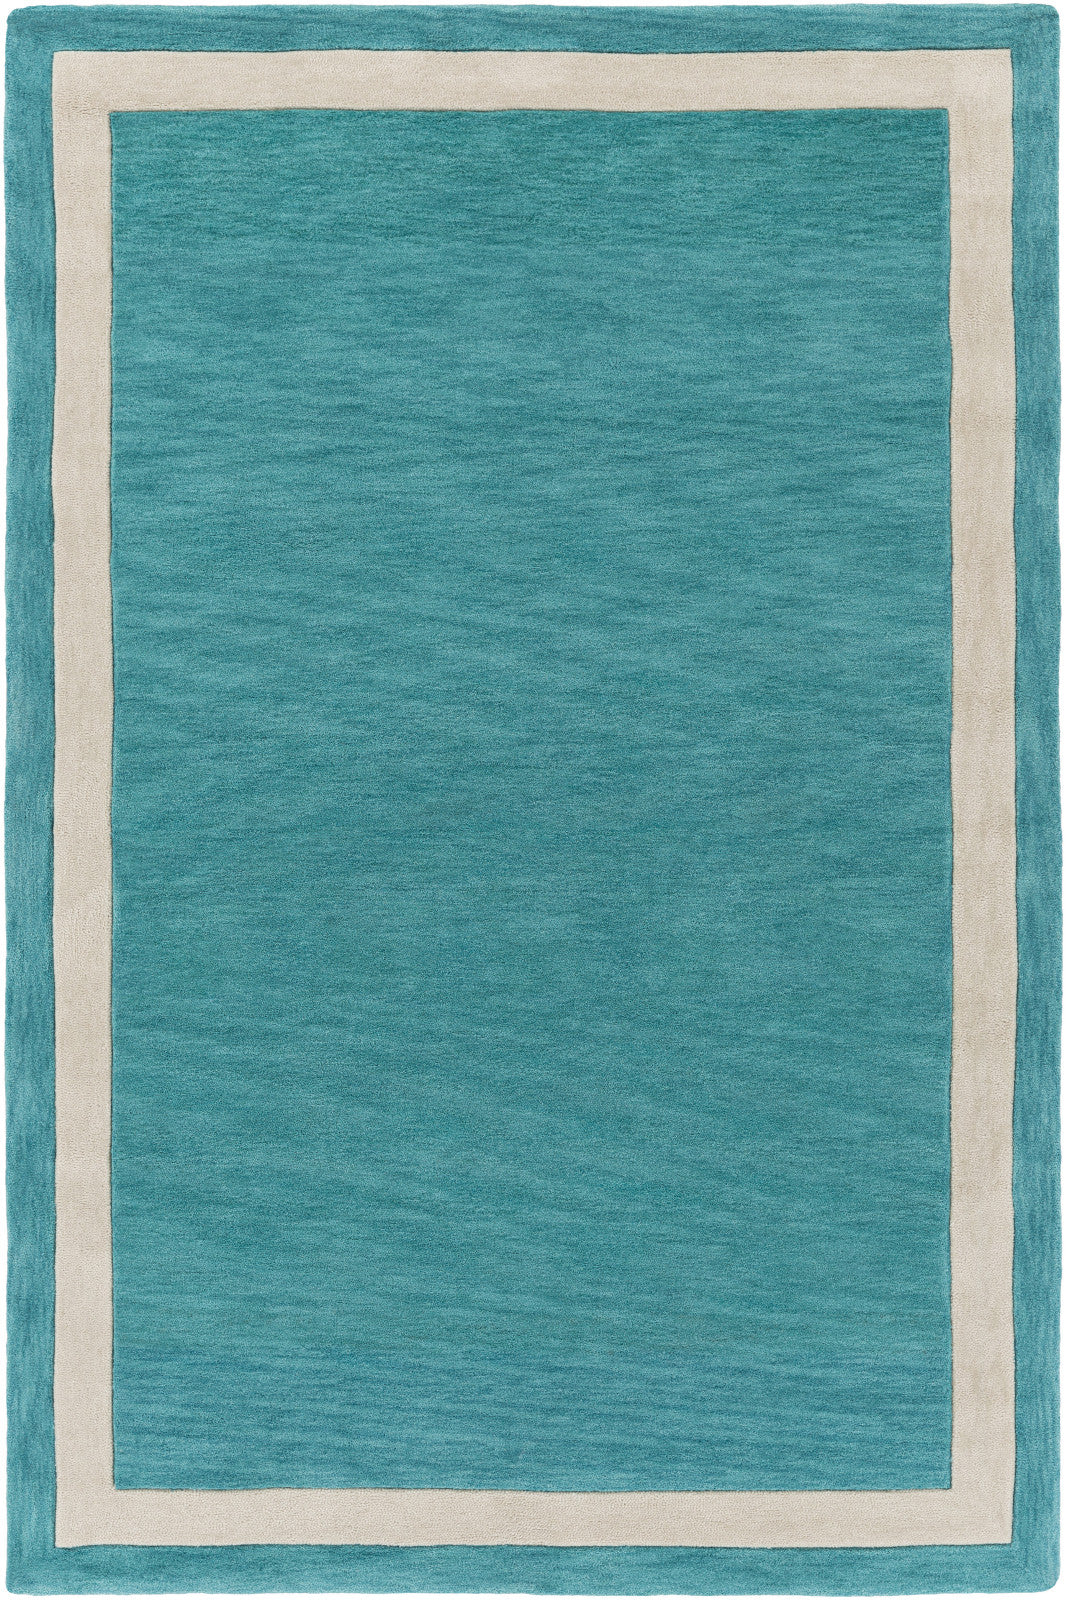 Artistic Weavers Holden Blair Turquoise/Ivory Area Rug main image